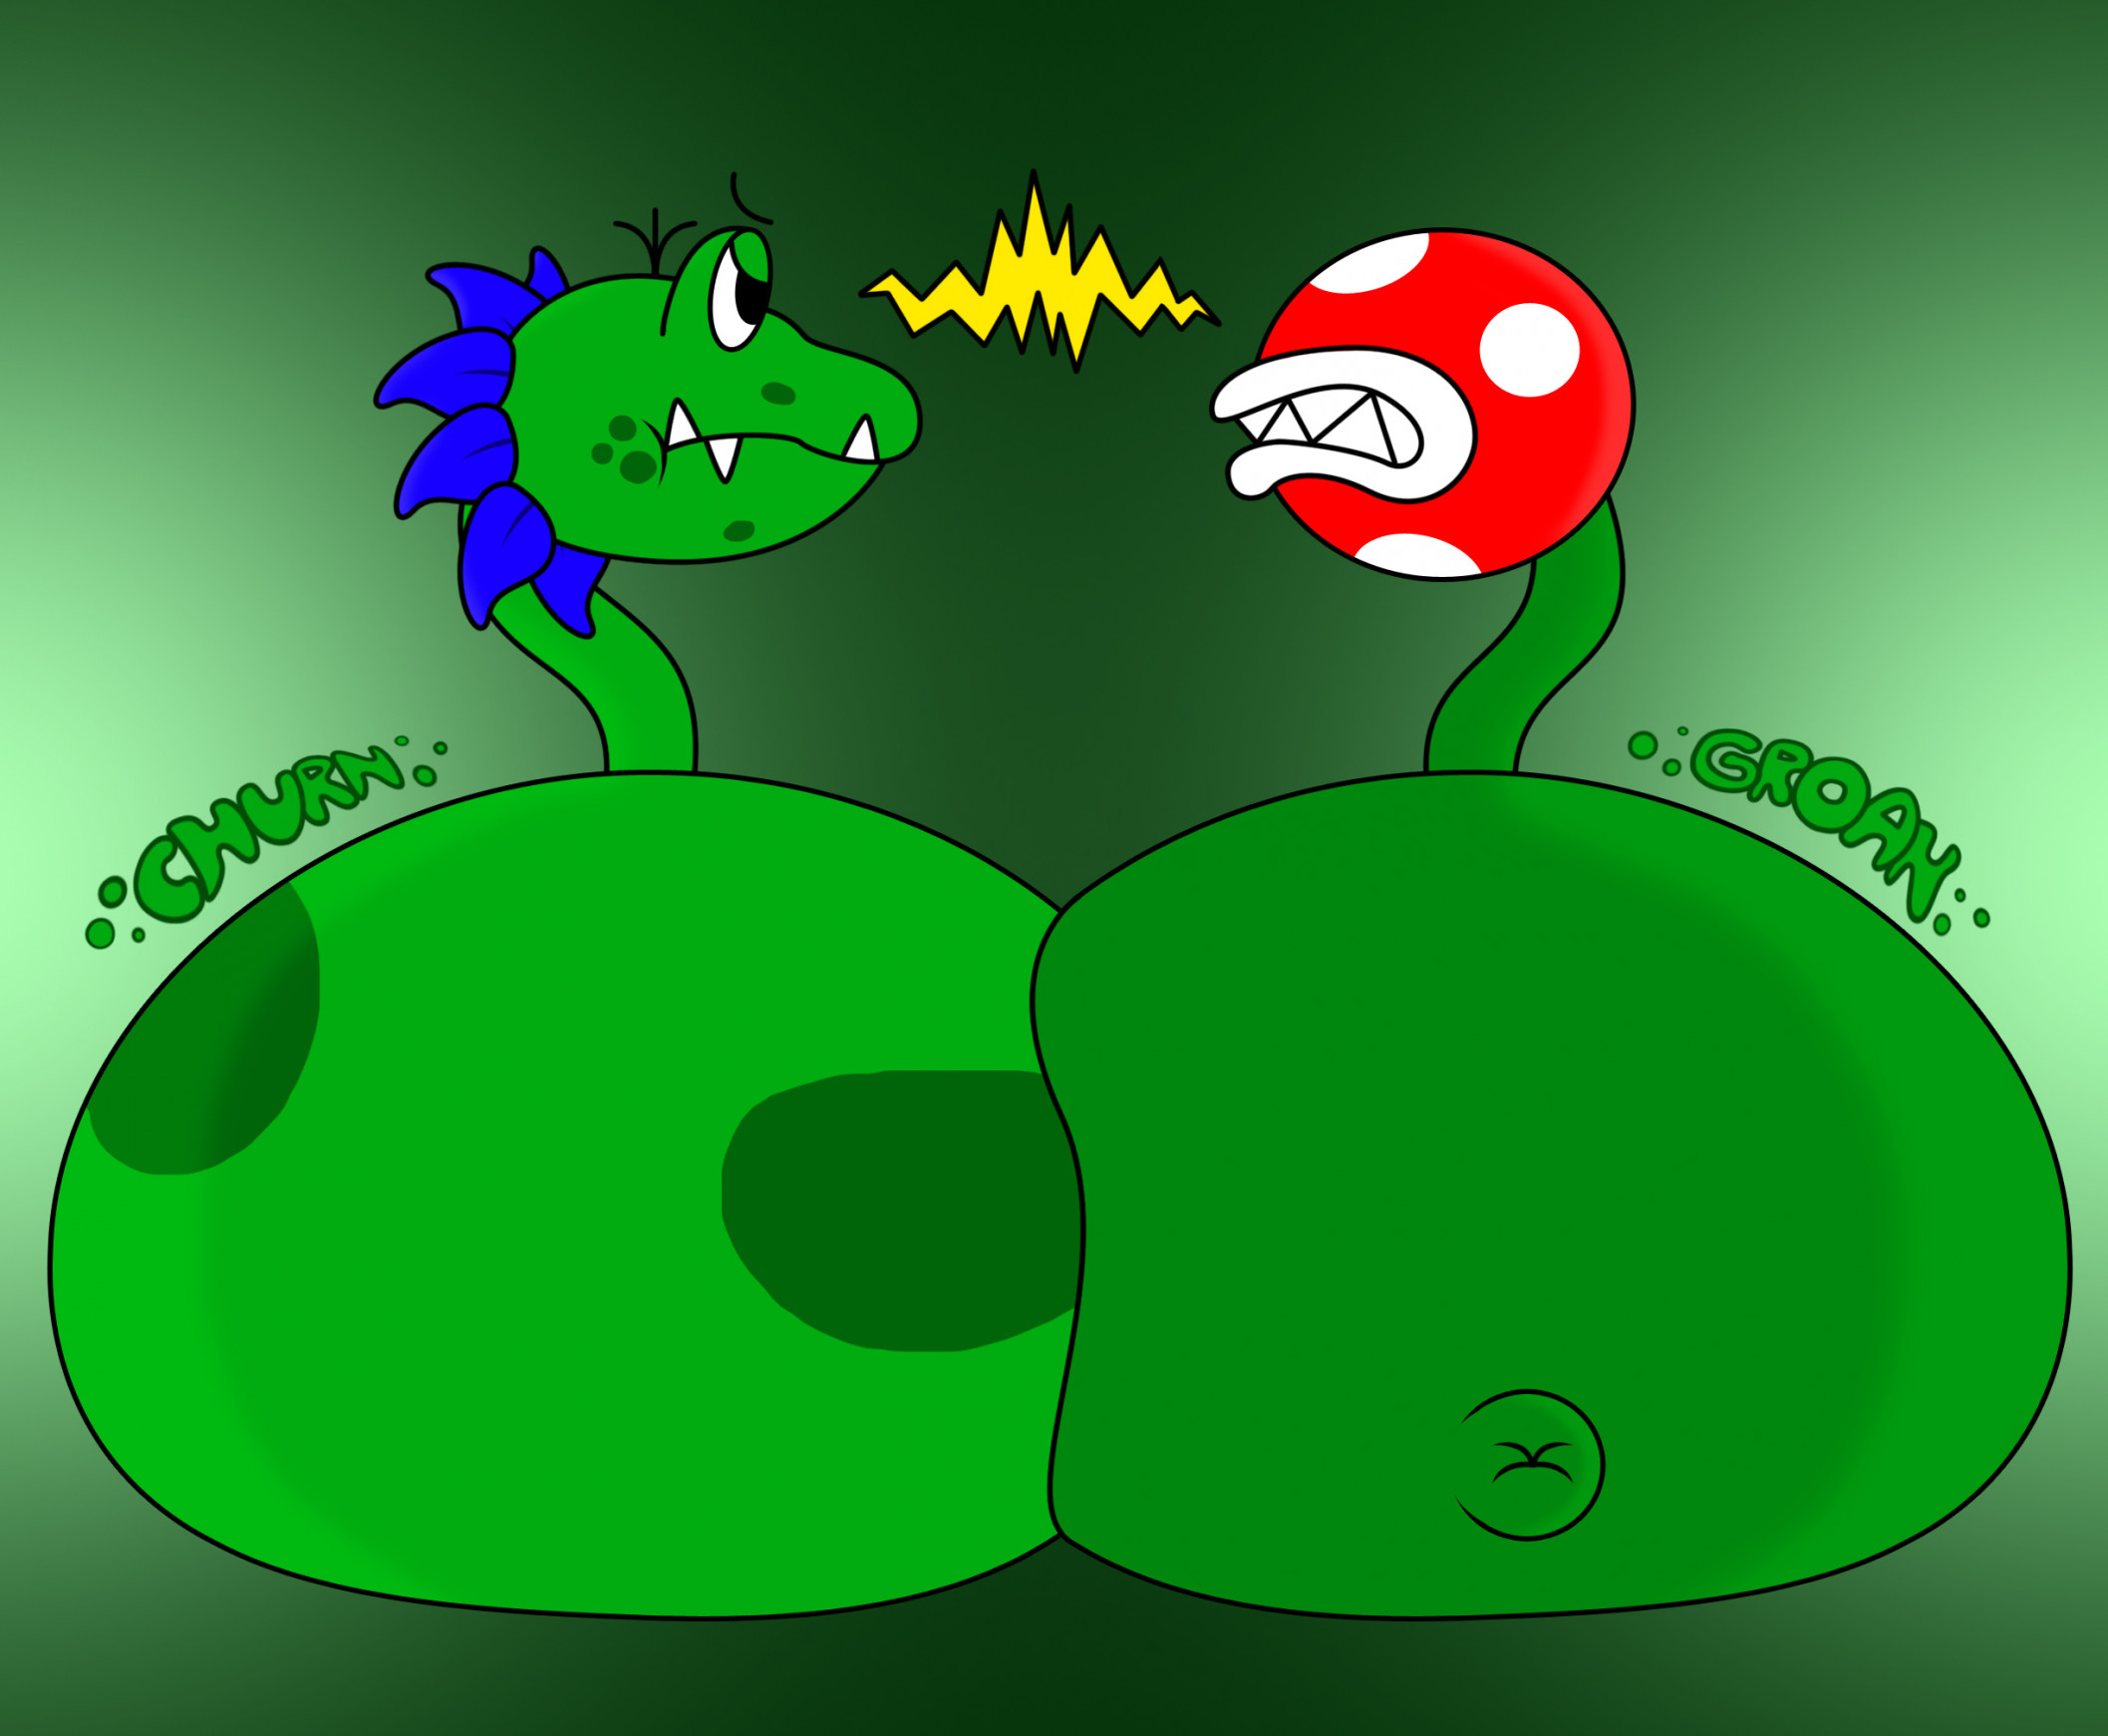 Green M&M gets chocolate pumped by Popperexpand -- Fur Affinity [dot] net